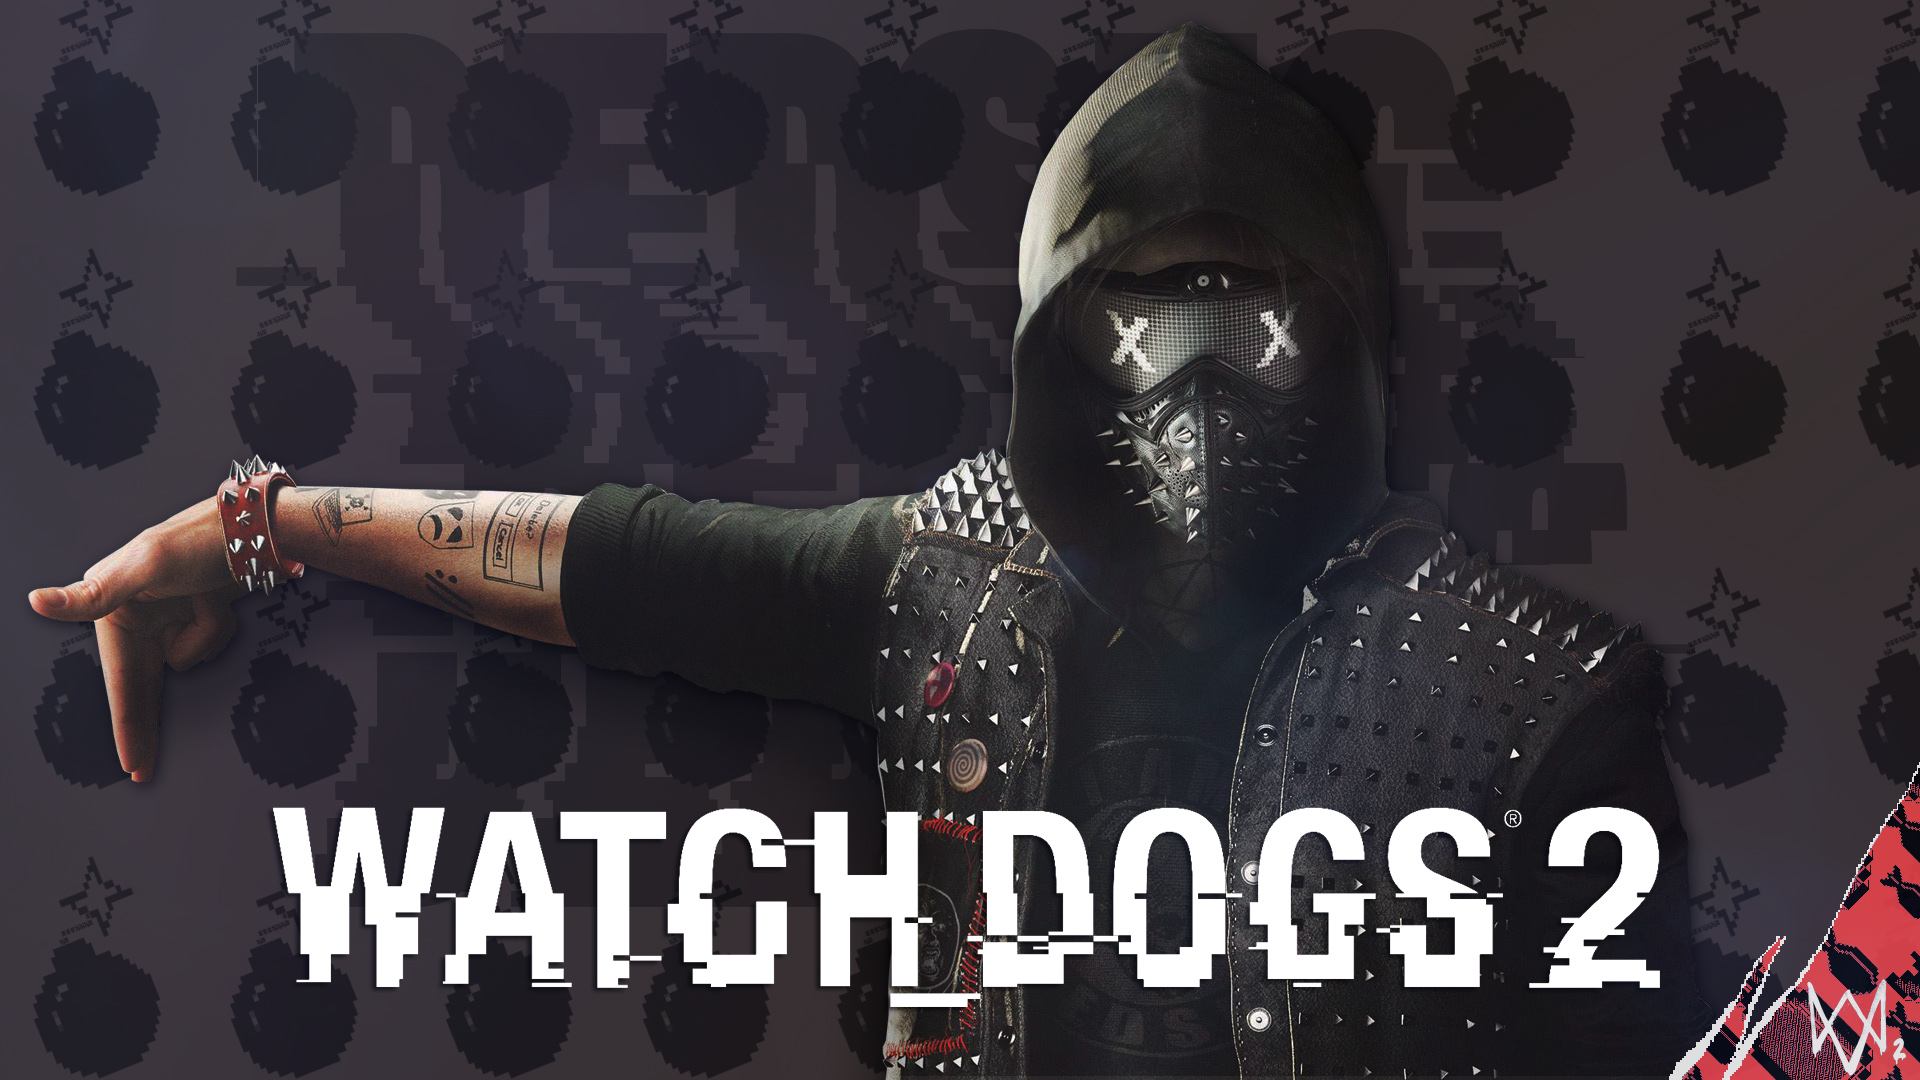 Watch Dogs, Wrench, Watch Dogs 2 Wallpaper